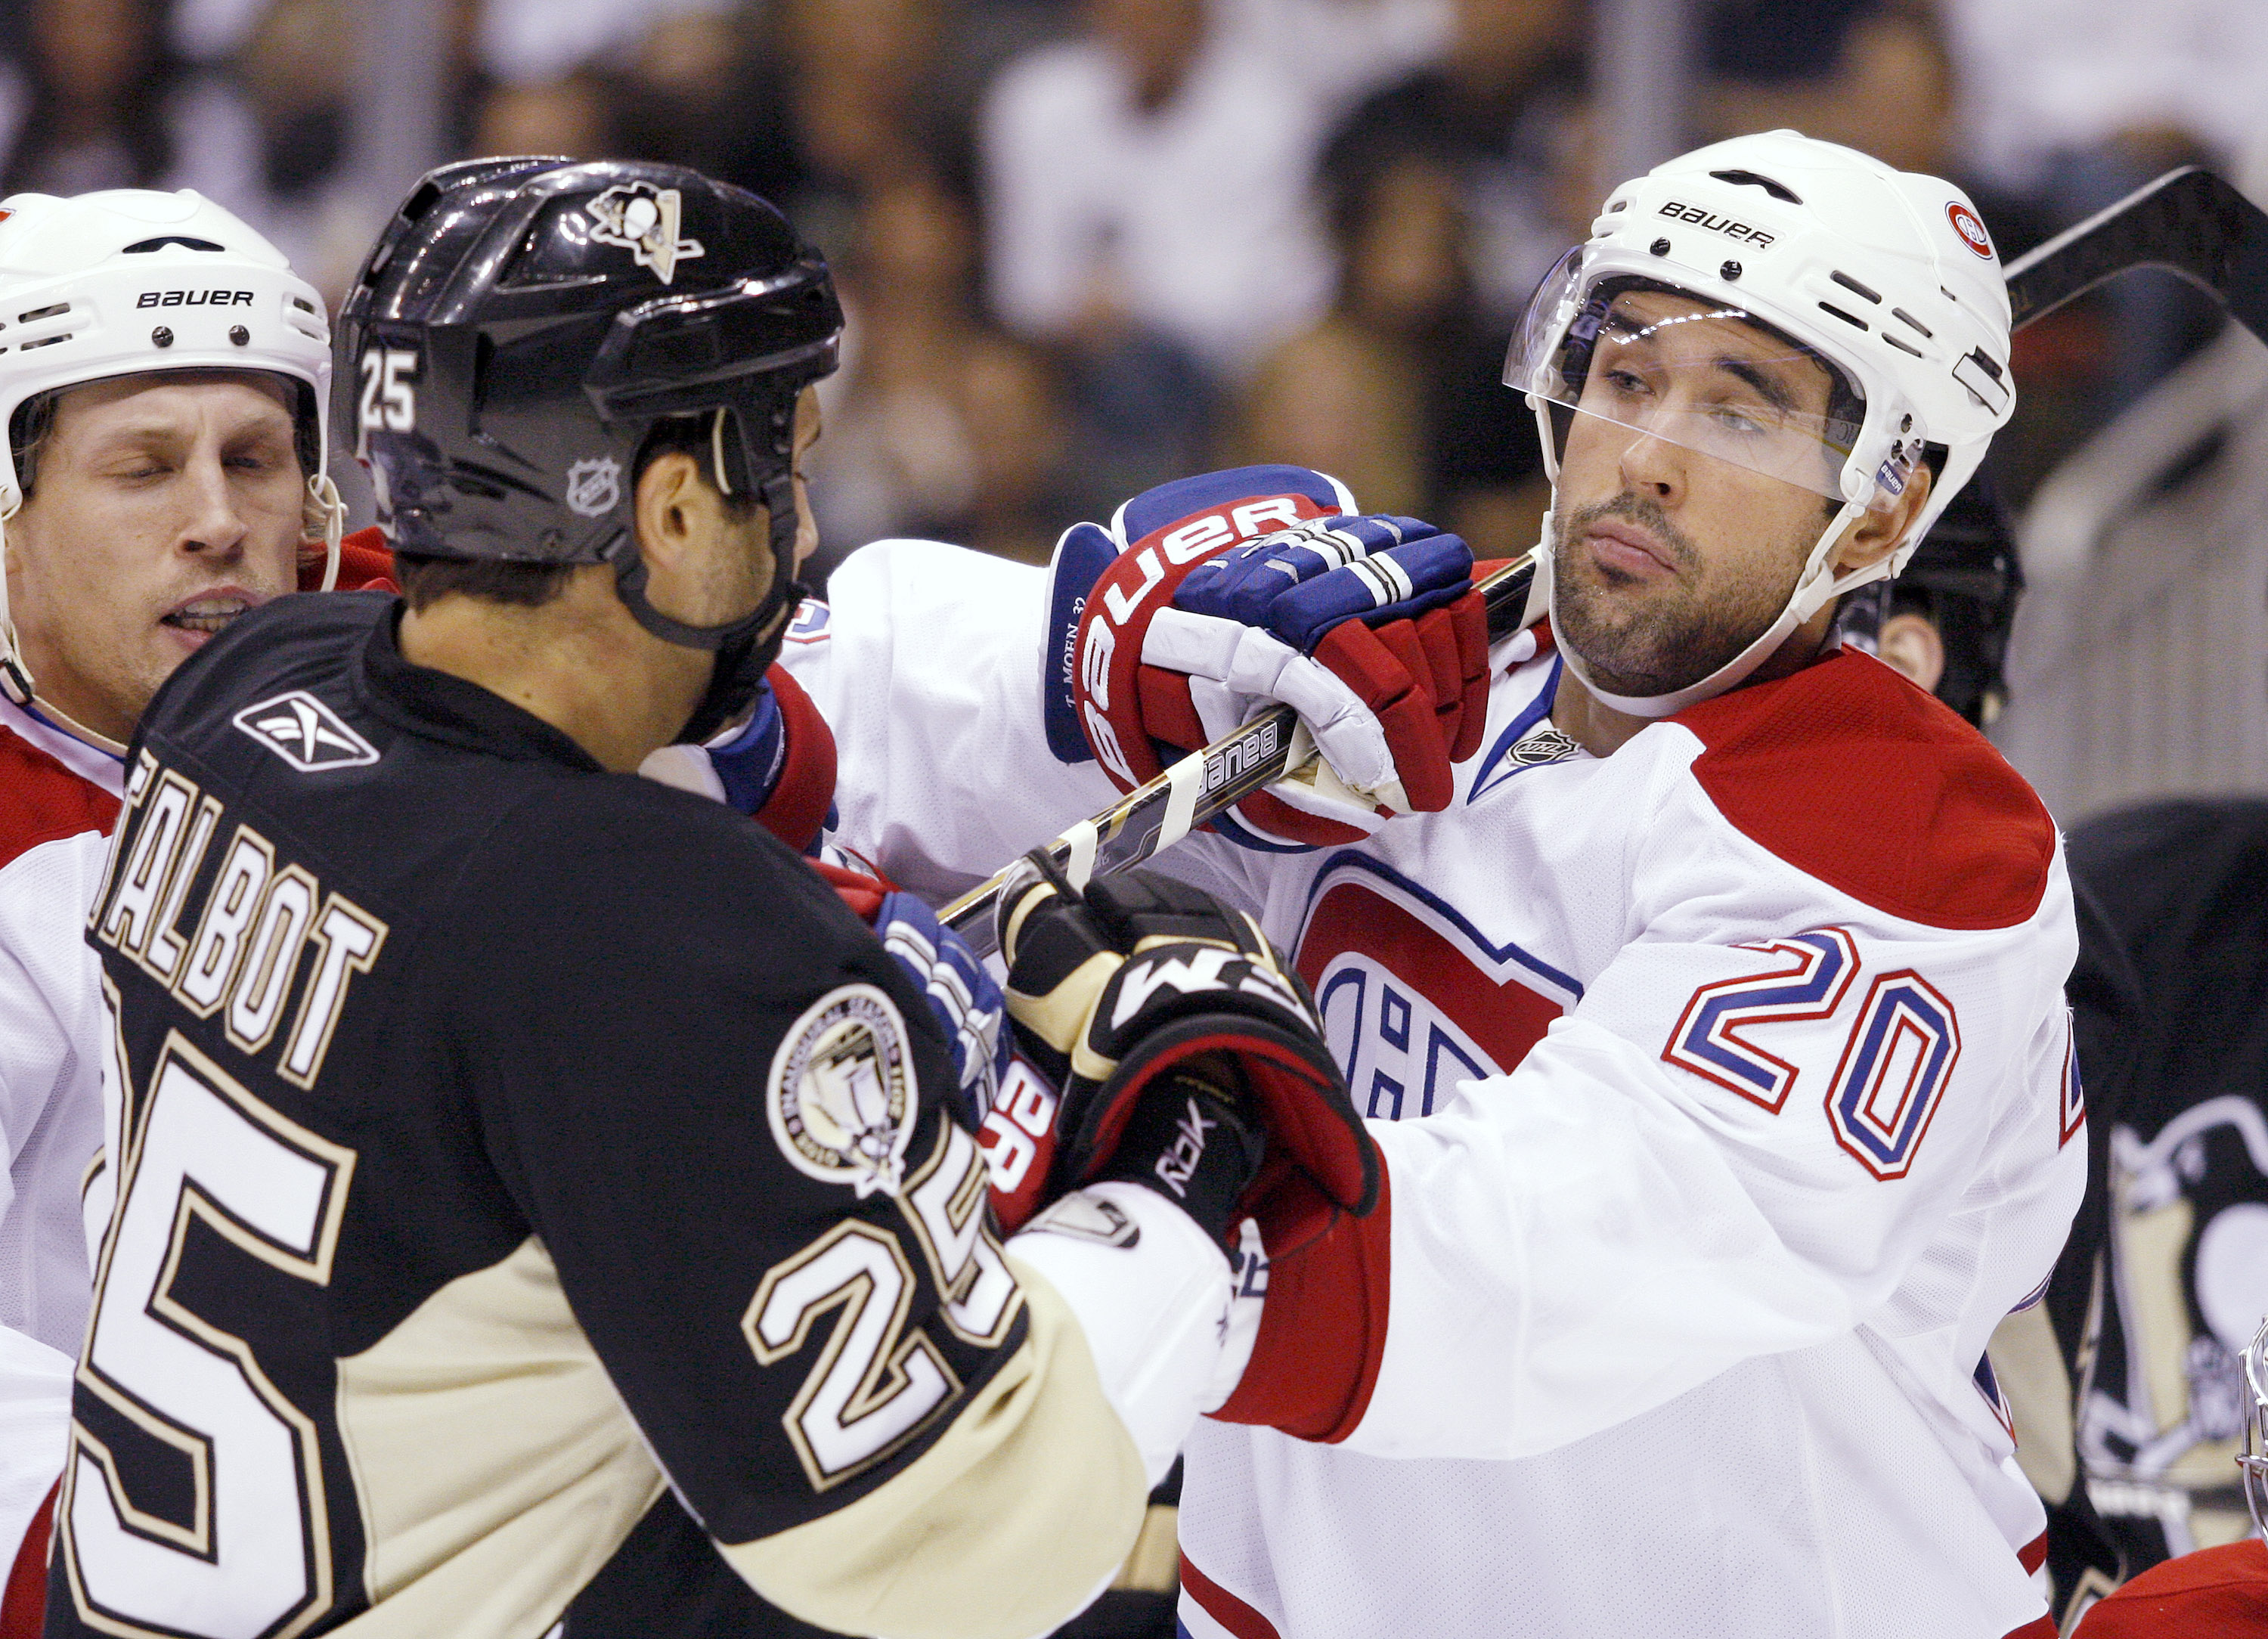 PITTSBURGH - OCTOBER 9:  Max Talbot #25 of the Pittsburgh Penguins and Ryan O'Byrne #20 of the Montreal Canadiens mix it up in the first period at Consol Energy Center on October 9, 2010 in Pittsburgh, Pennsylvania.  (Photo by Justin K. Aller/Getty Images